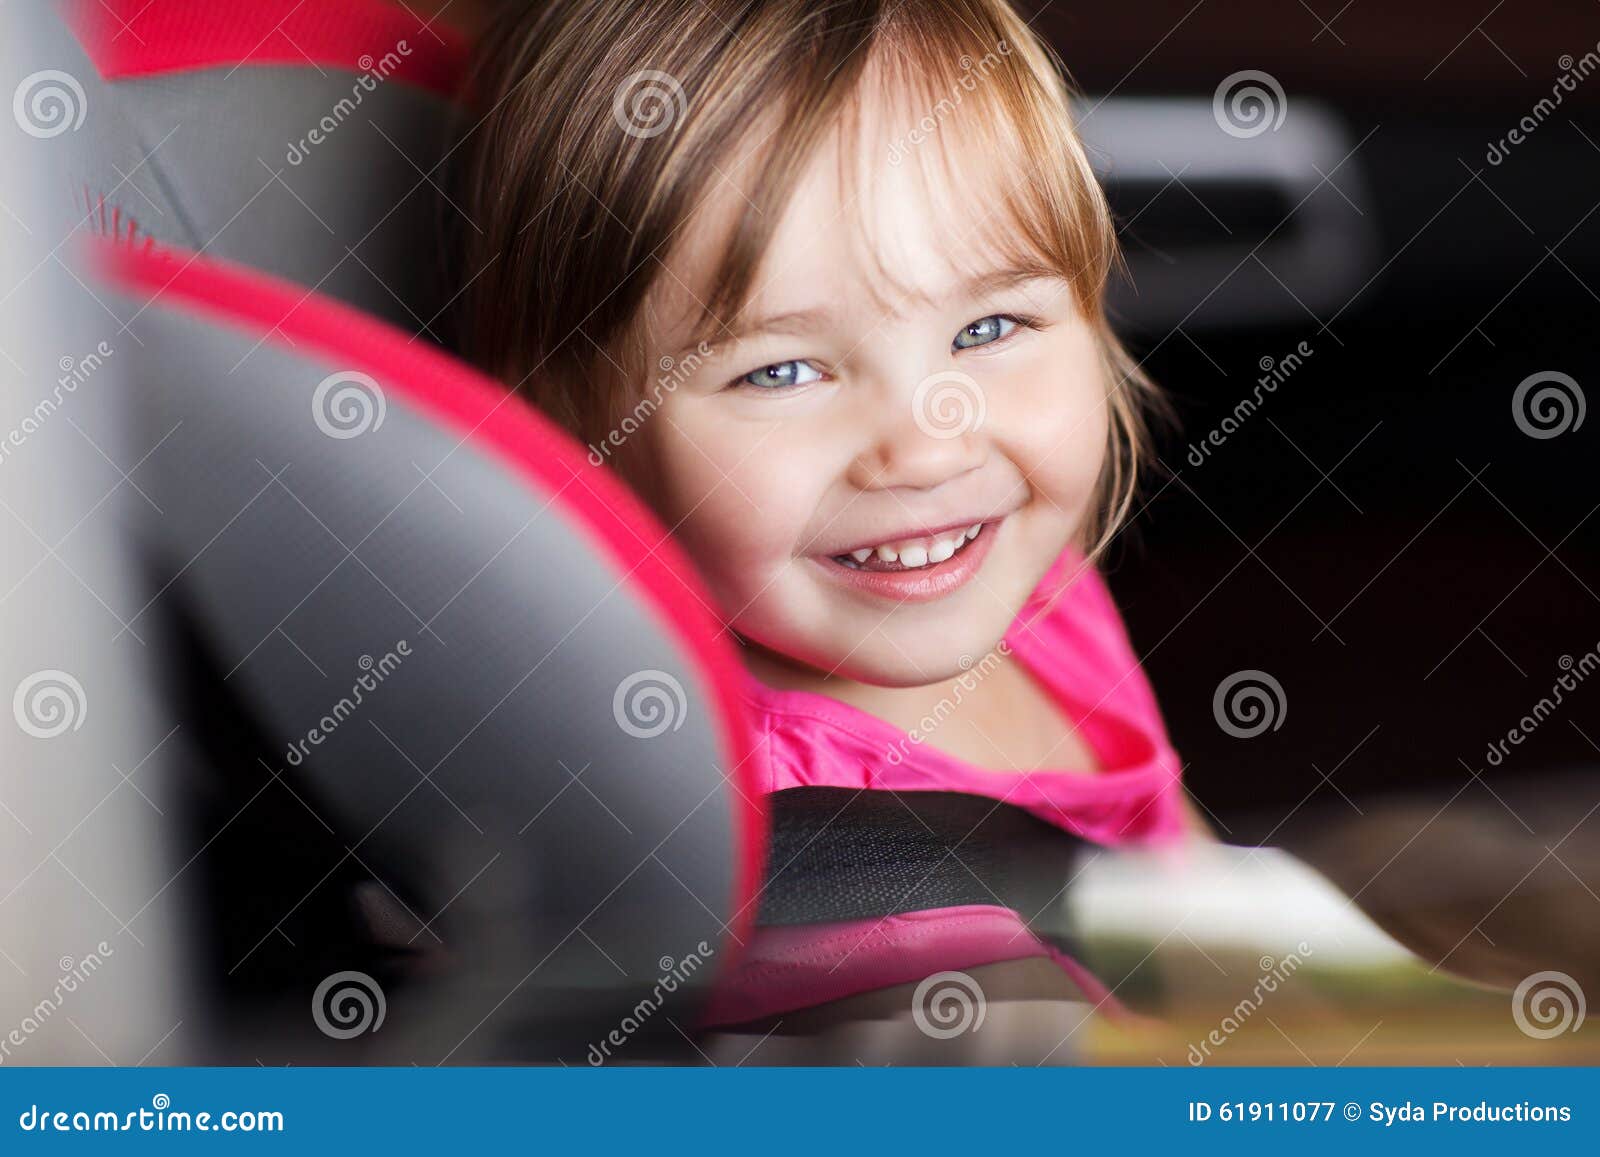 happy little girl sitting in baby car seat